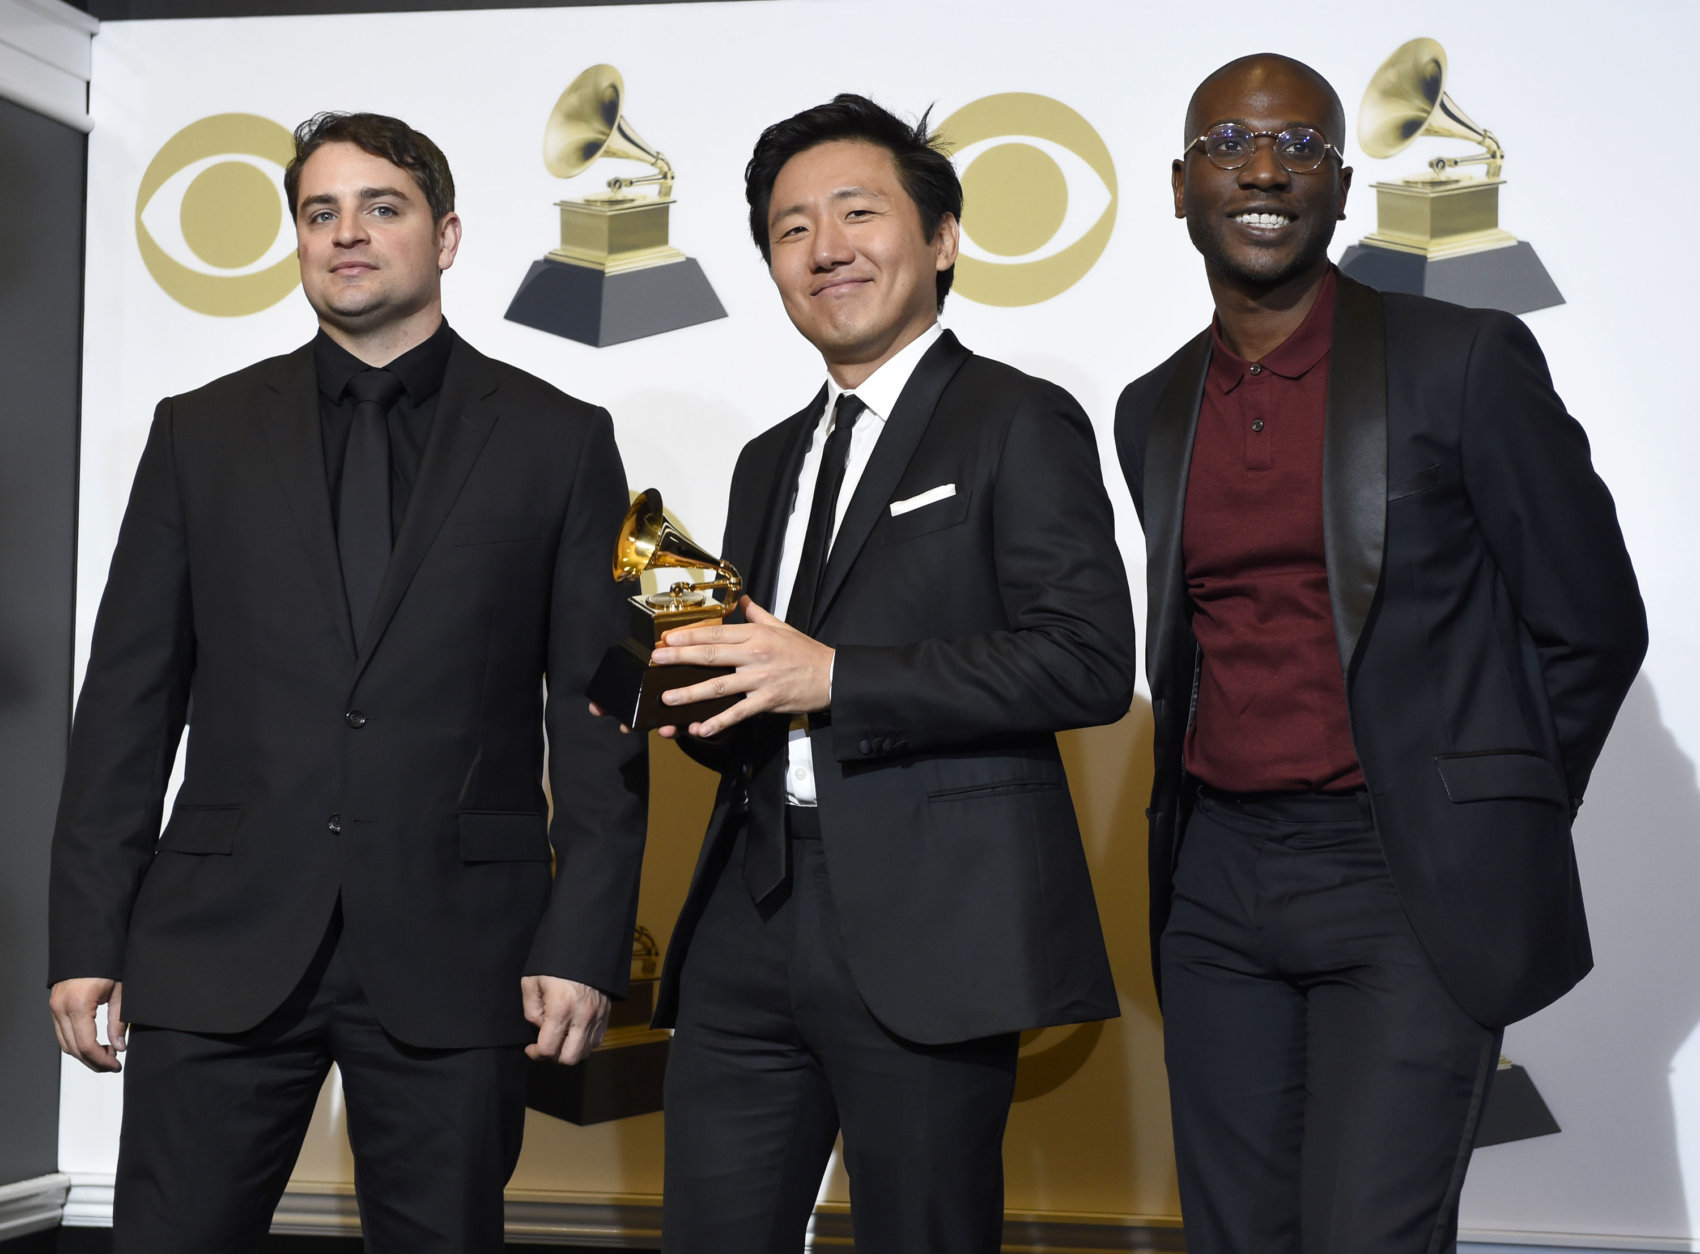 Jason Cole, from left, Hiro Murai and Ibra Ake pose in the press room with the award for best music video for Childish Gambino's "This Is America" at the 61st annual Grammy Awards at the Staples Center on Sunday, Feb. 10, 2019, in Los Angeles. (Photo by Chris Pizzello/Invision/AP)